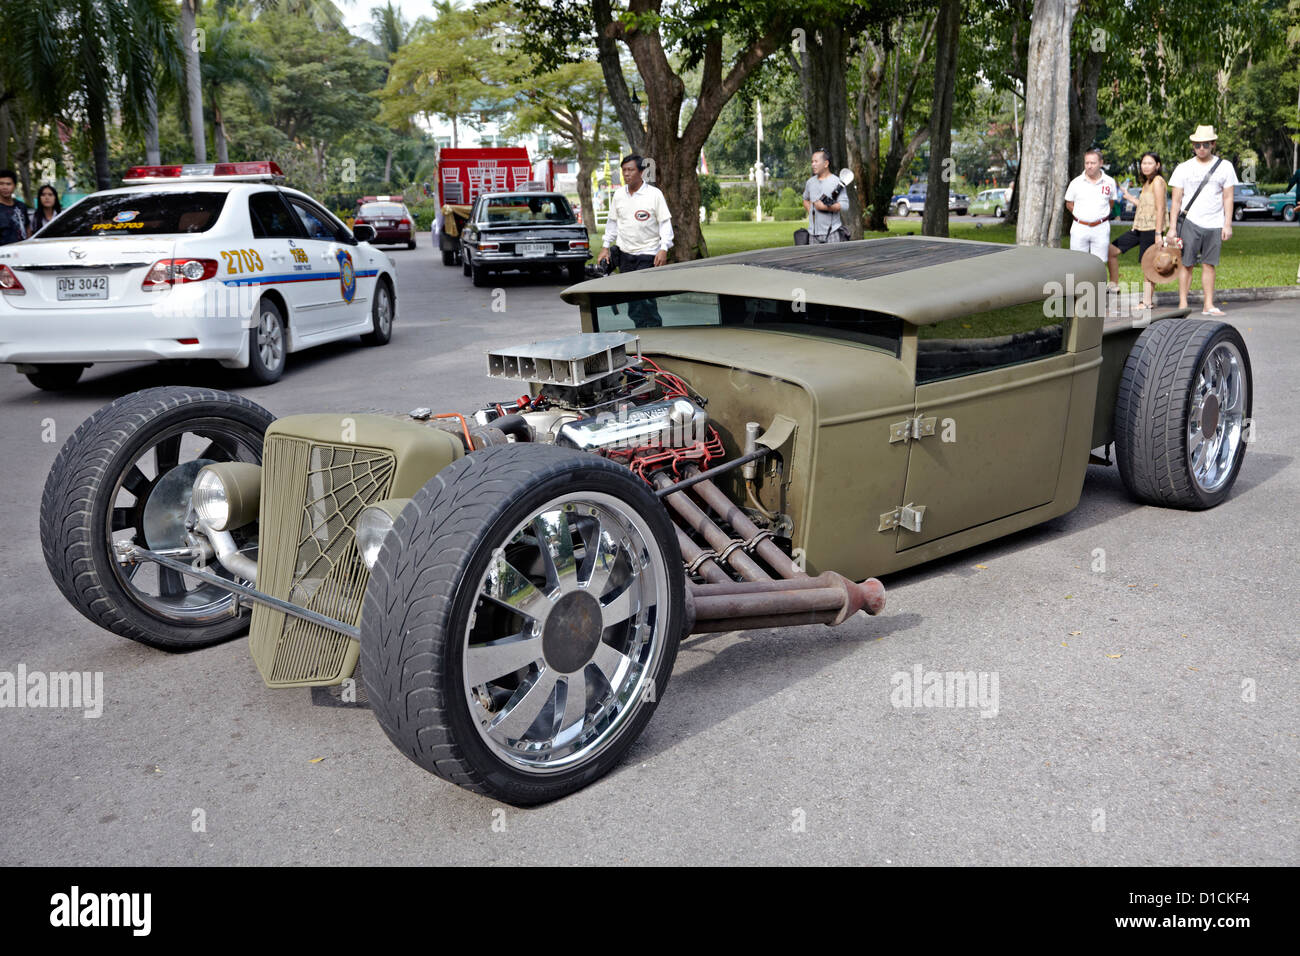 Extremely customised low rider hot rod car. Thailand S. E. Asia Stock Photo